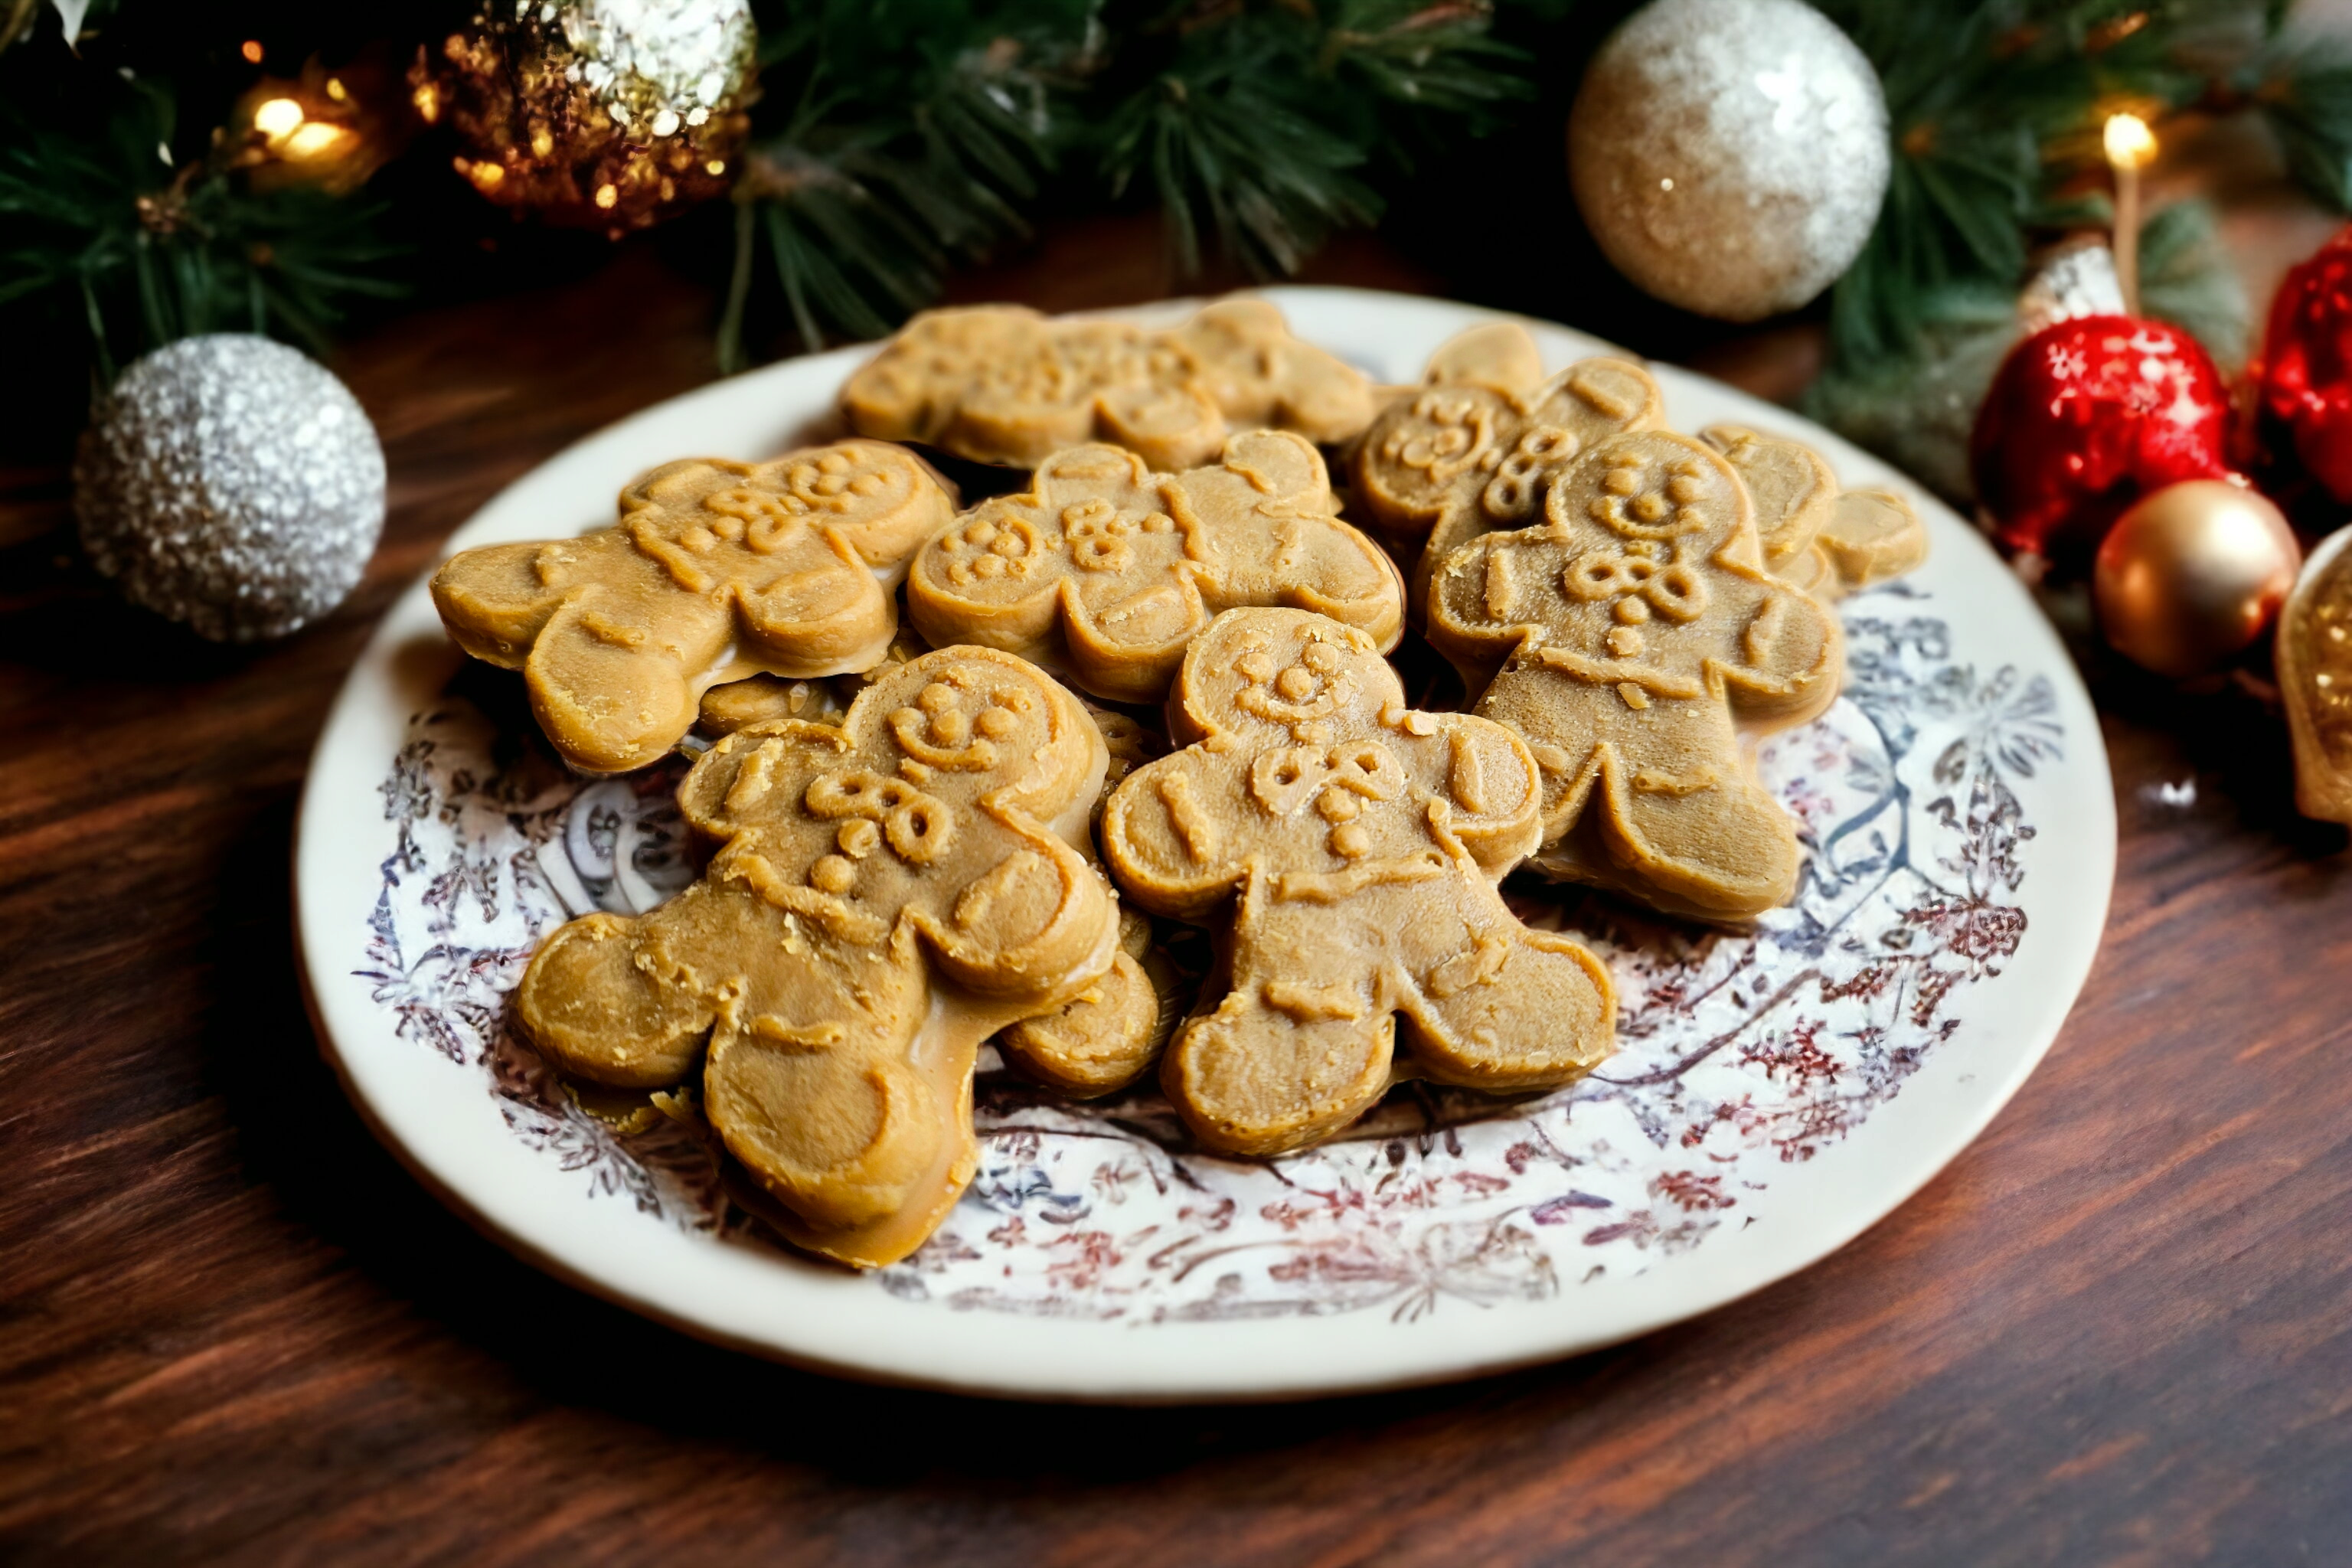 Gingerbread Cookie Wax Melts